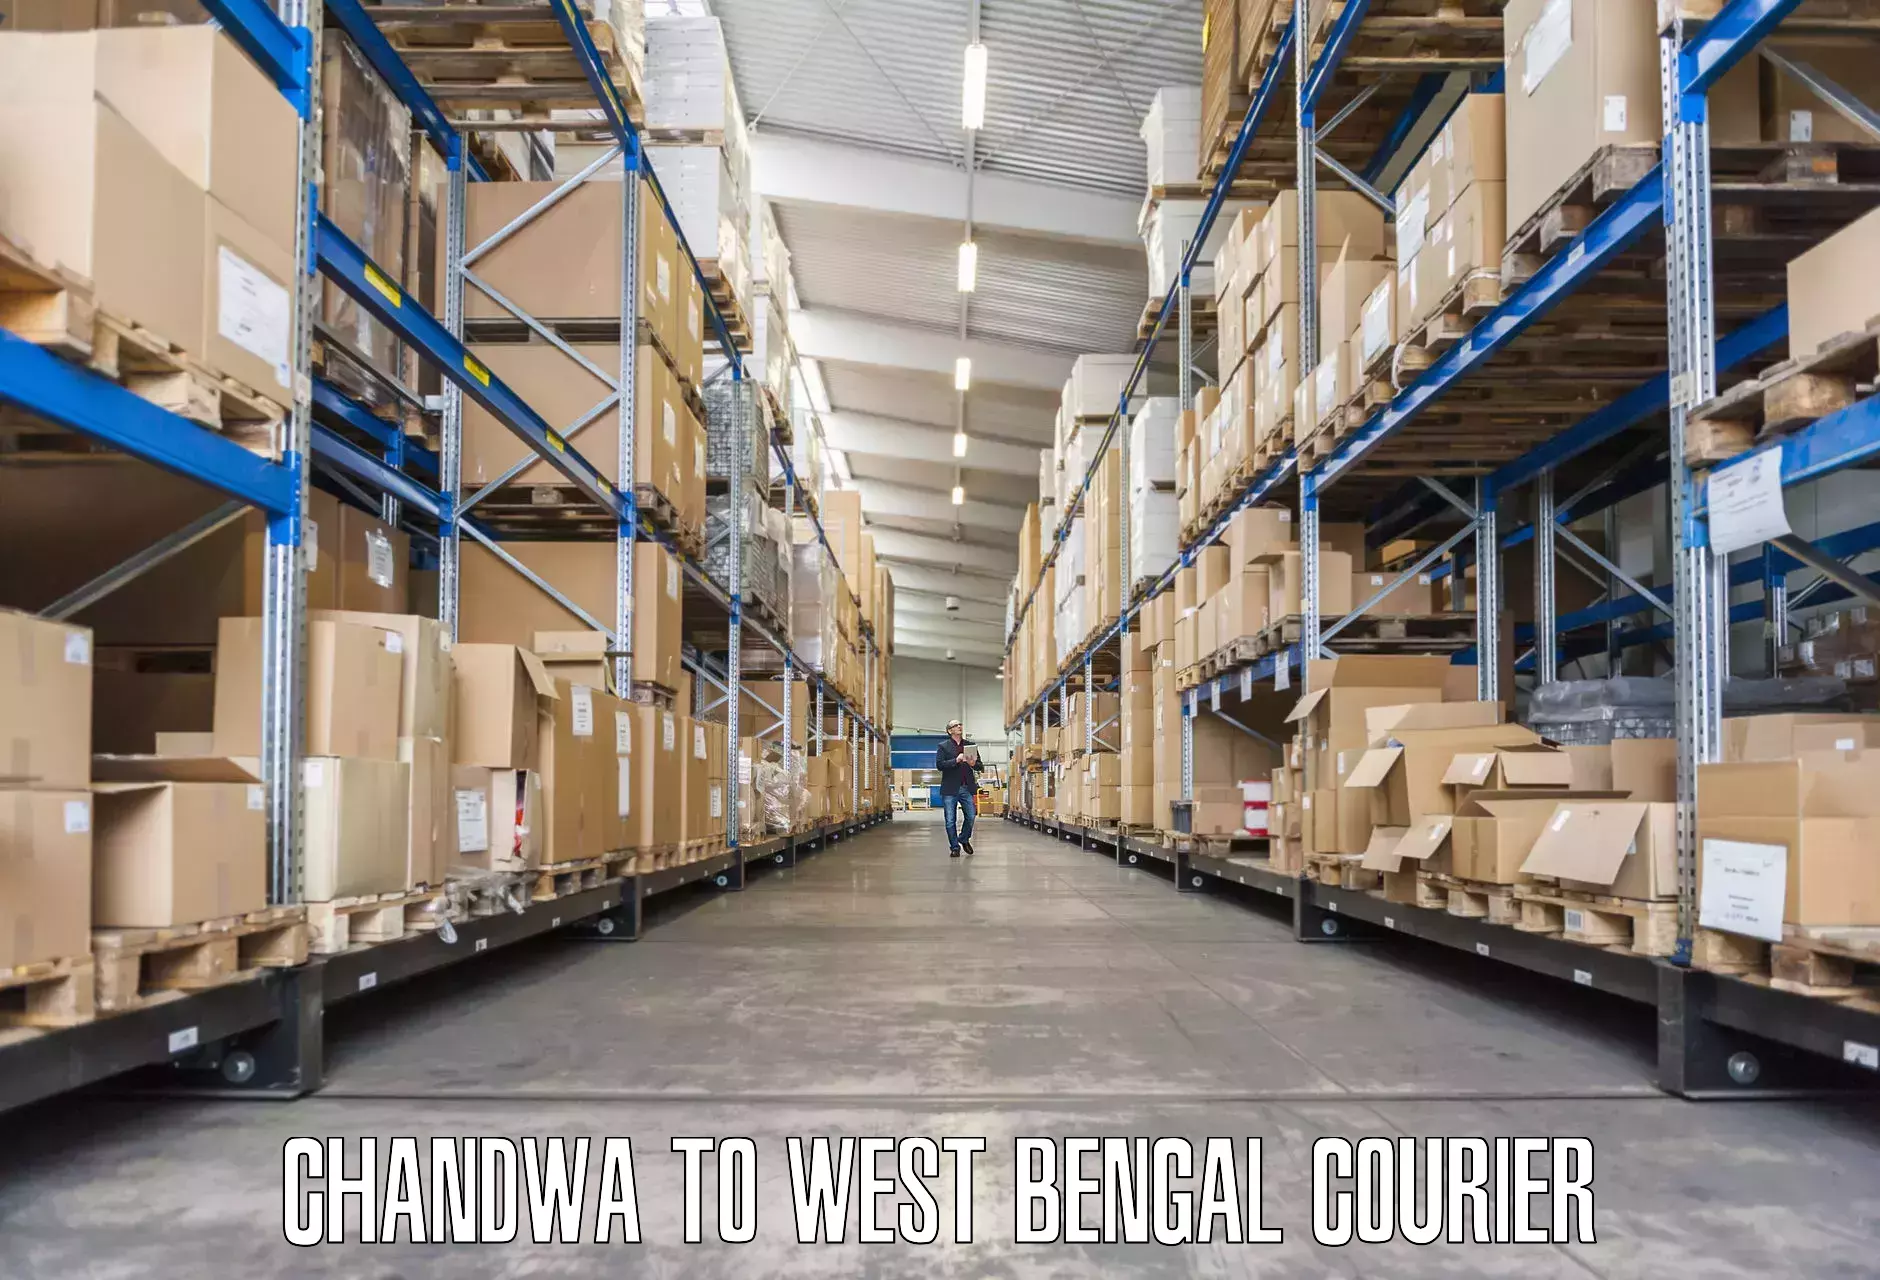 Moving and storage services Chandwa to Chandrakona Road